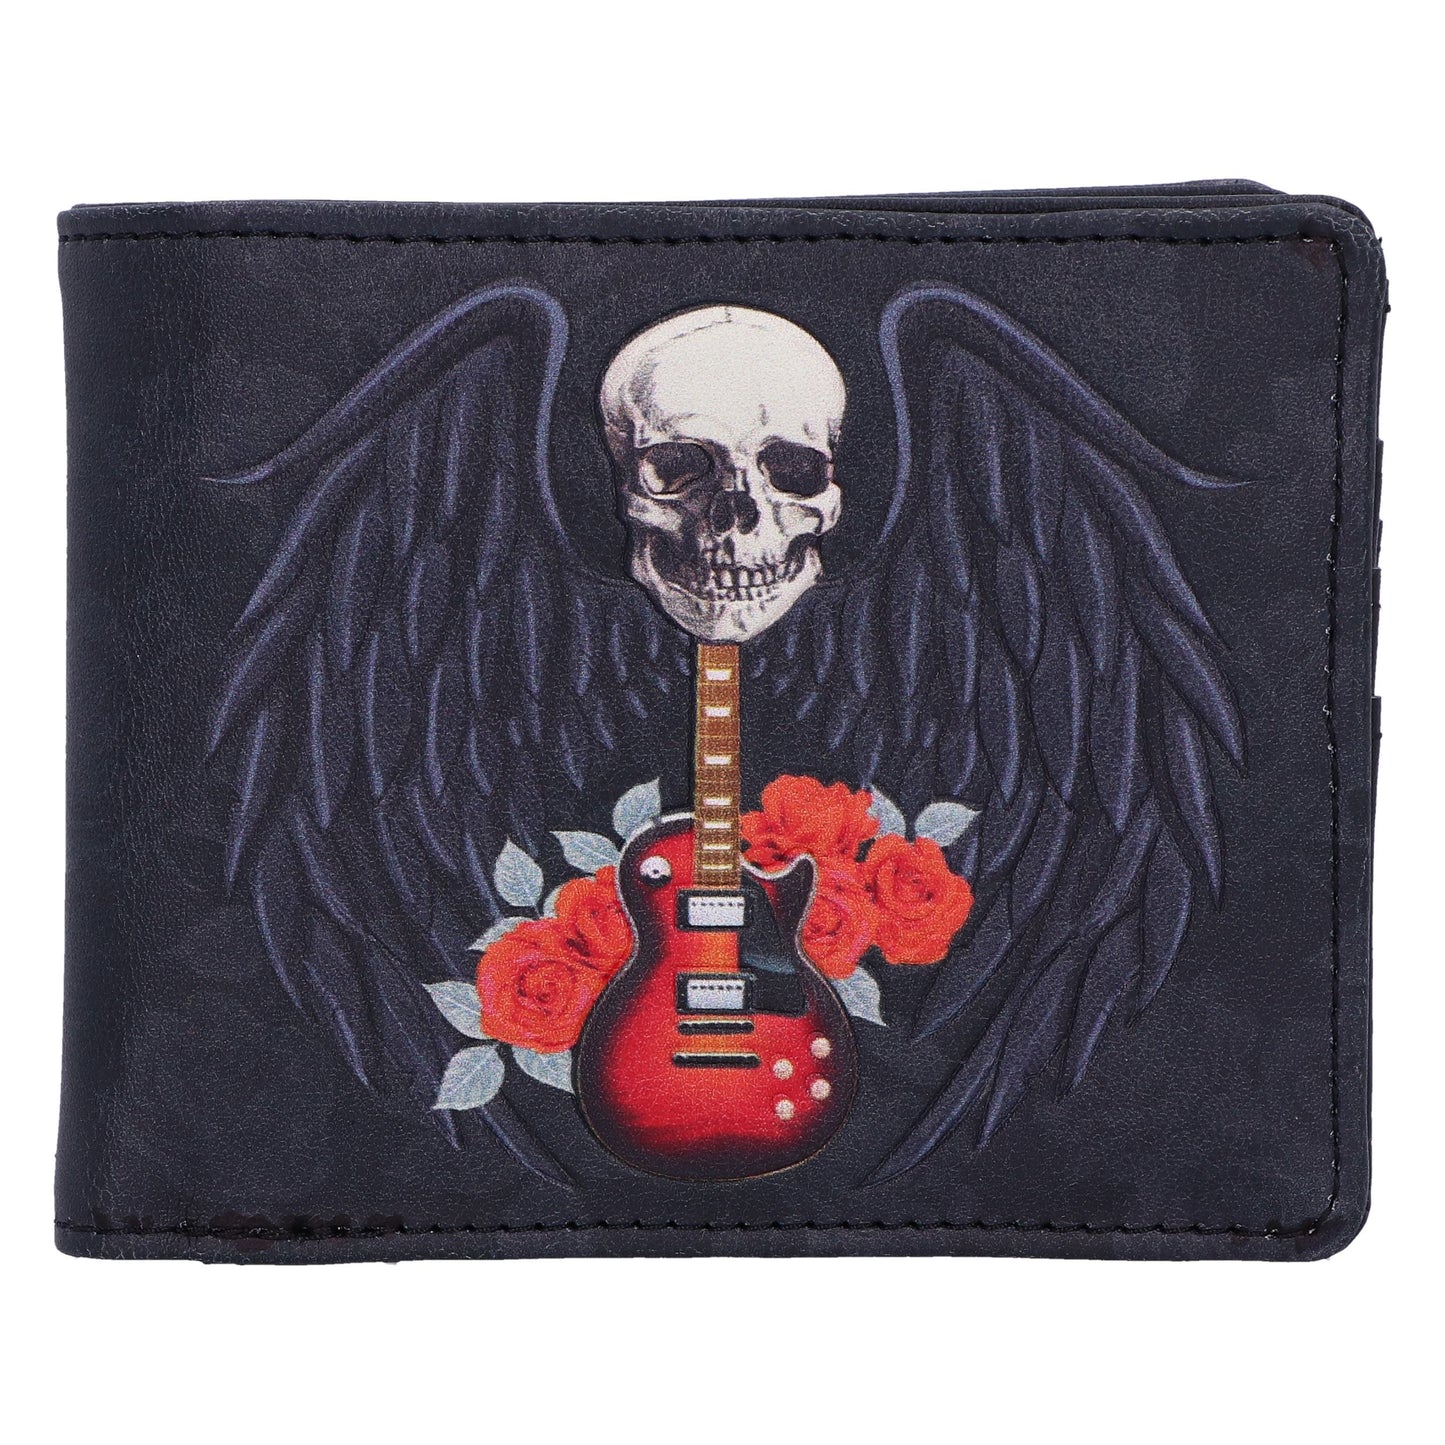 Rock and Roses Gothic Skull Wallet